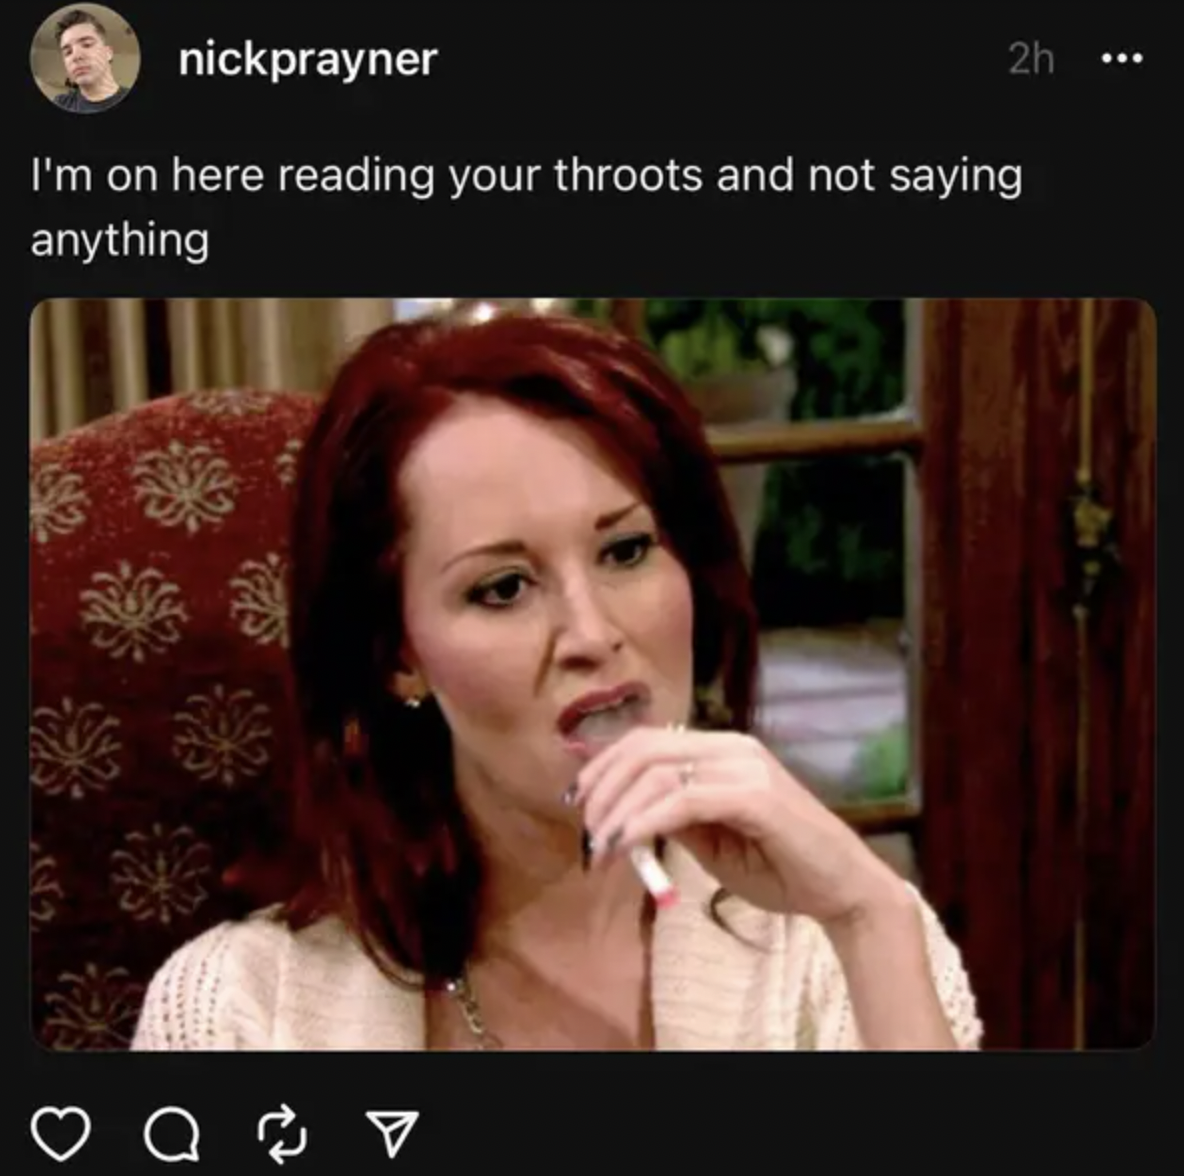 best threads of the week - real allison dubois house - nickprayner I'm on here reading your throots and not saying anything 2h